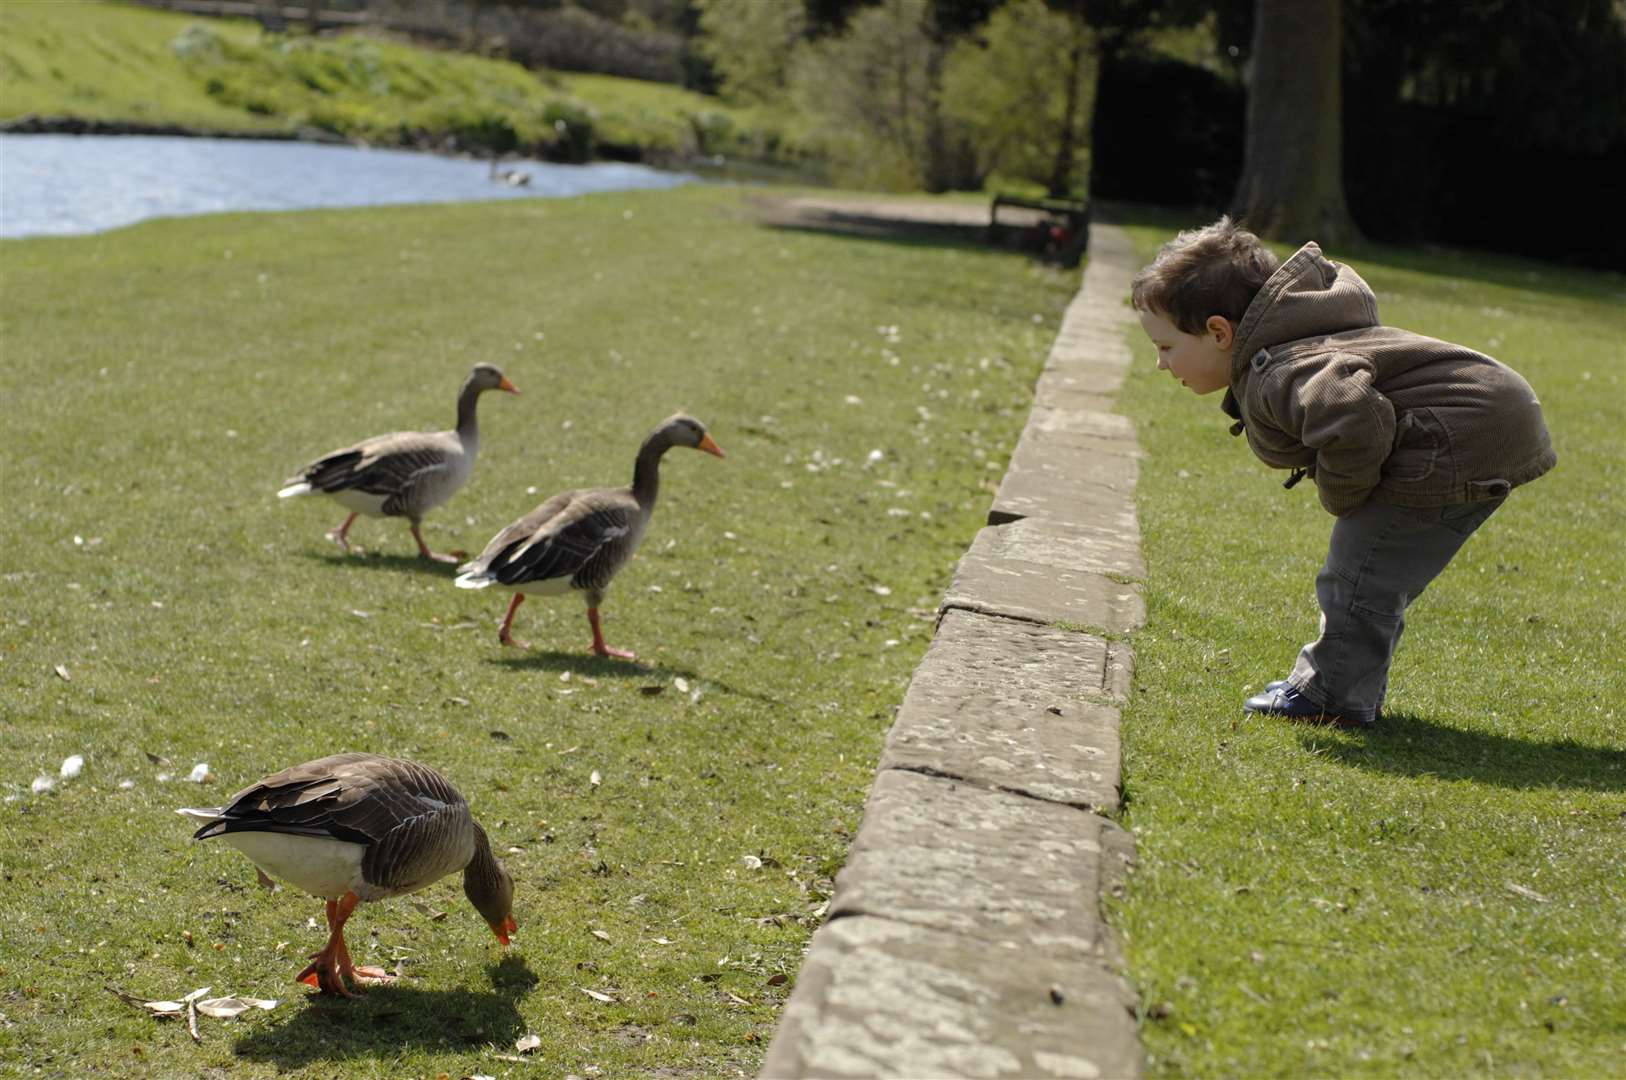 Geese have been a fixture of the Hall Place gardens for many years. Picture: David Antony Hunt